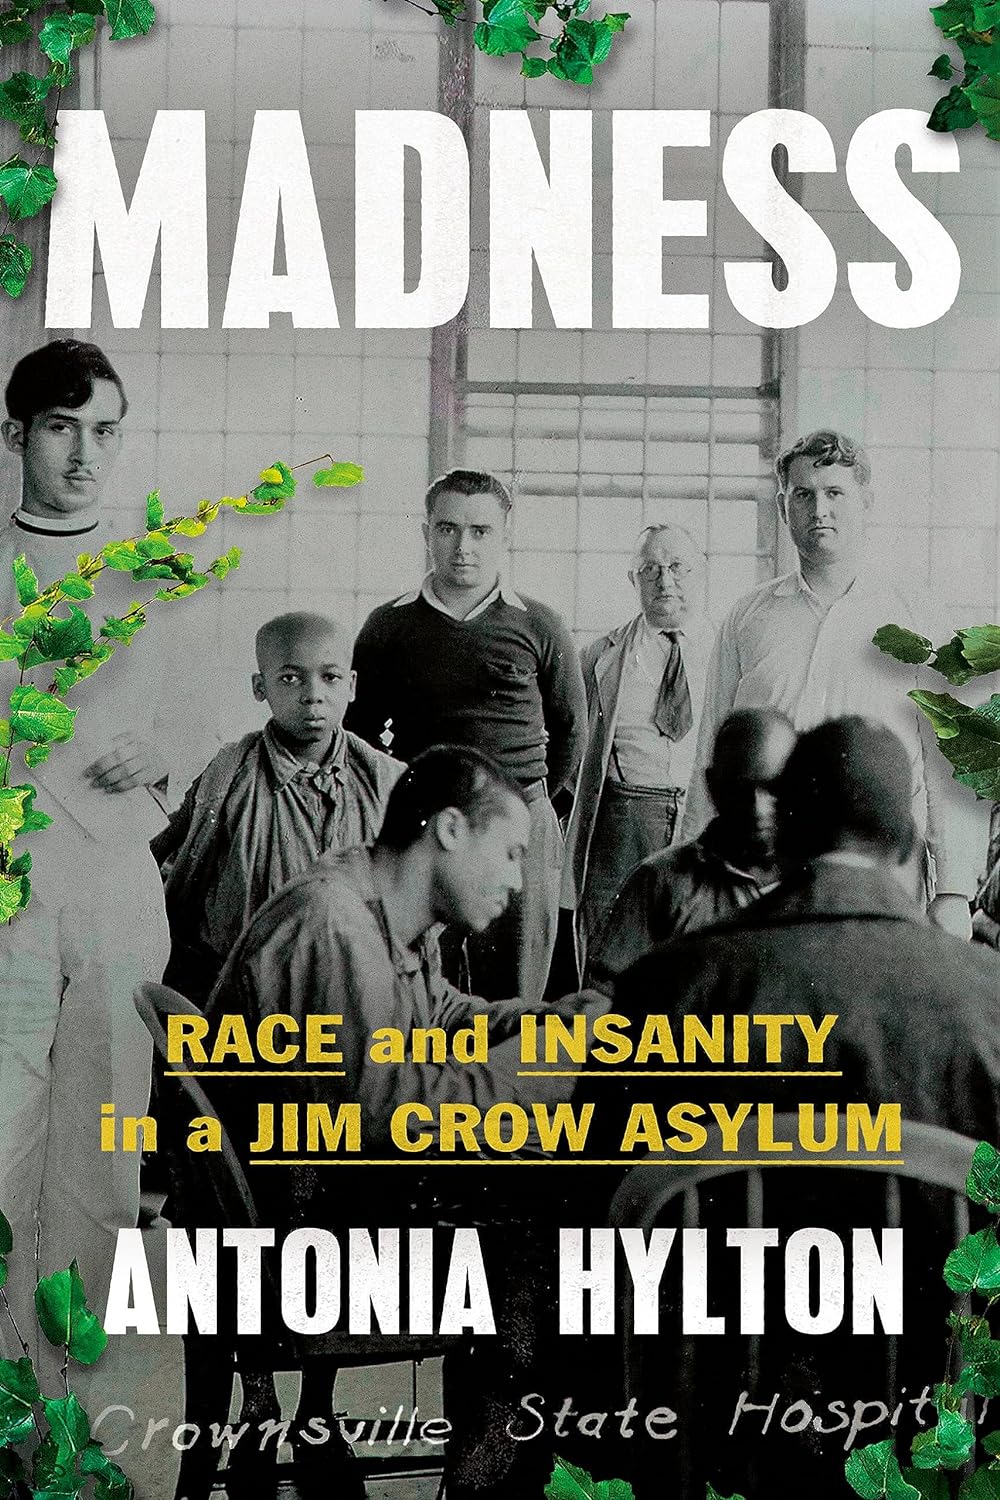 Madness: Race and Insanity in a Jim Crow Asylum by Antonia Hylton